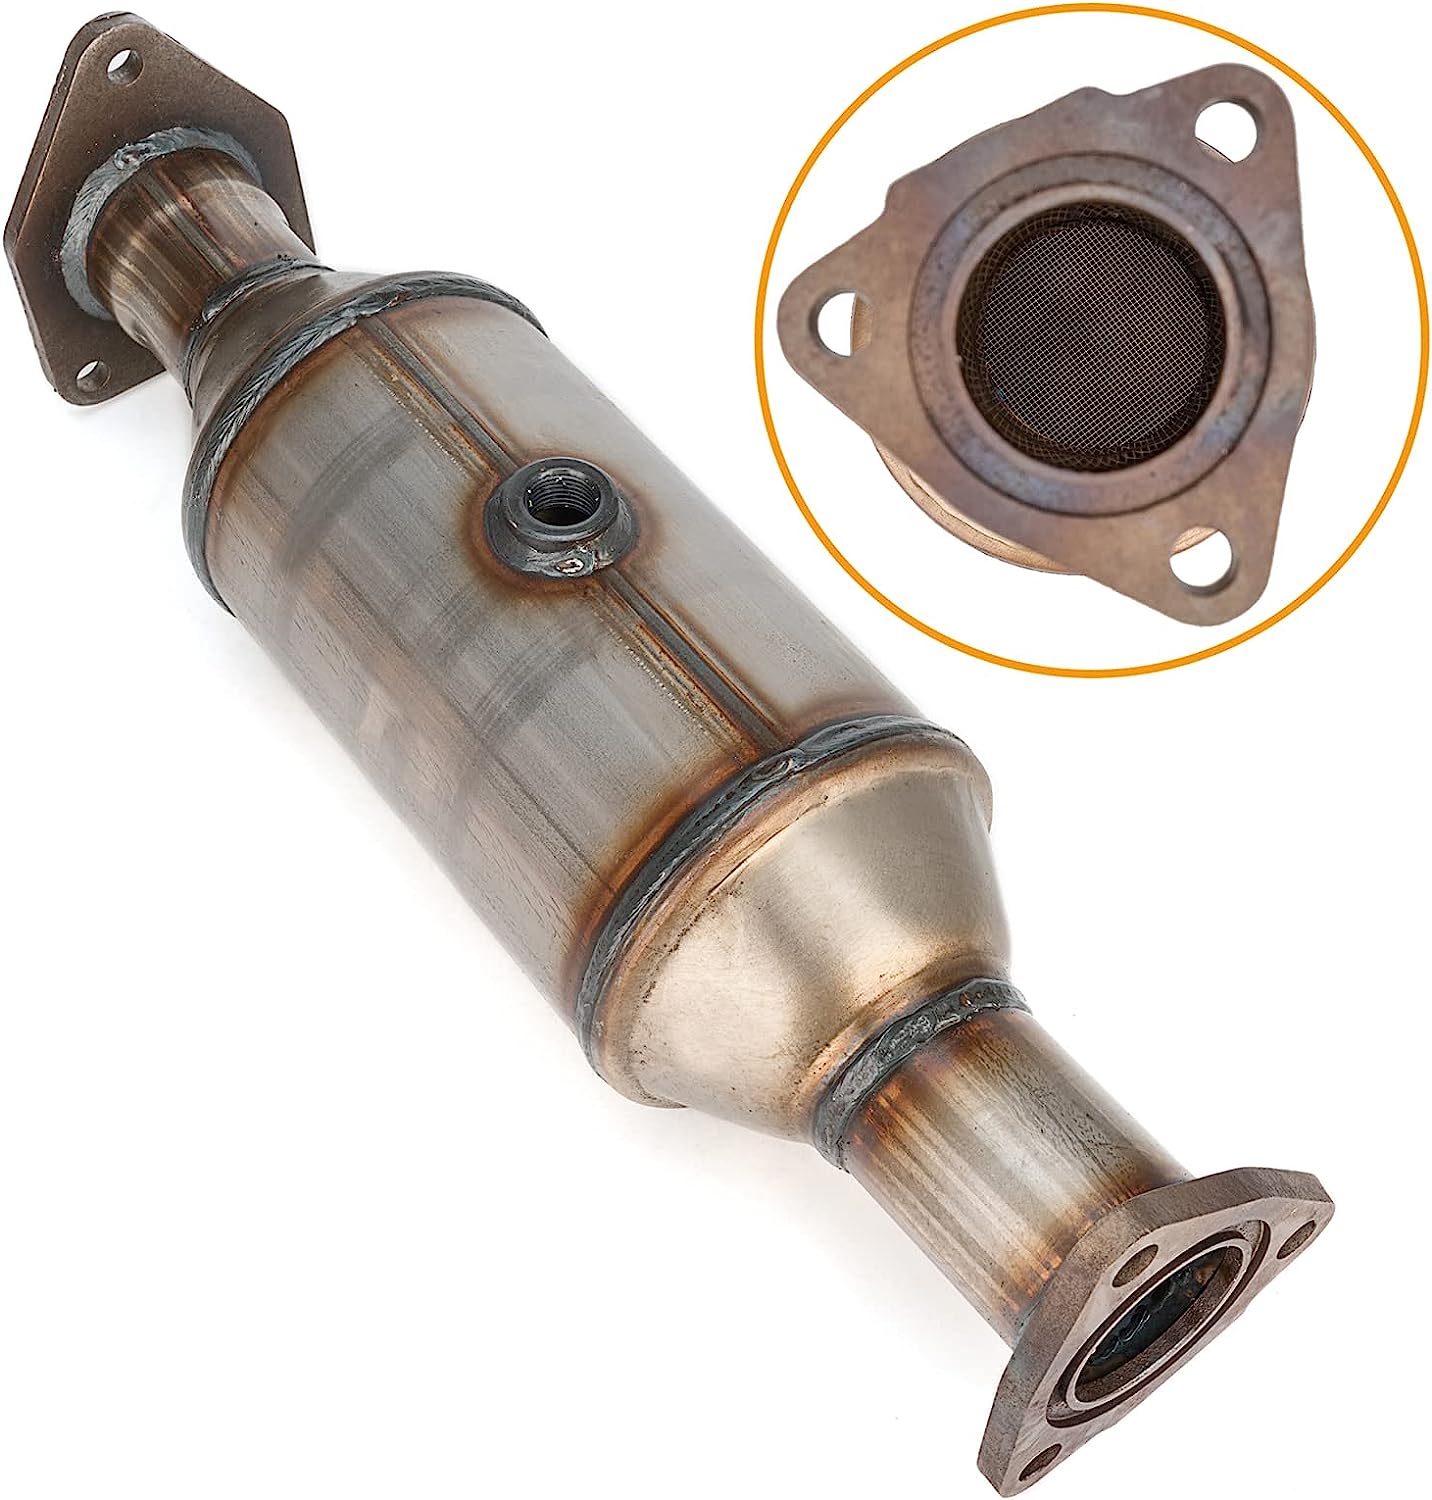 FOMIUZY High Flow Front Catalytic Converter Kit Direct-Fit Honda Odyssey 1999 2000 2001 2002 2003 2004 3.5L Accord 1998-2002 3.0L Acura TL 1999-2003 3.2L Acura CL 2001-2003 3.2L